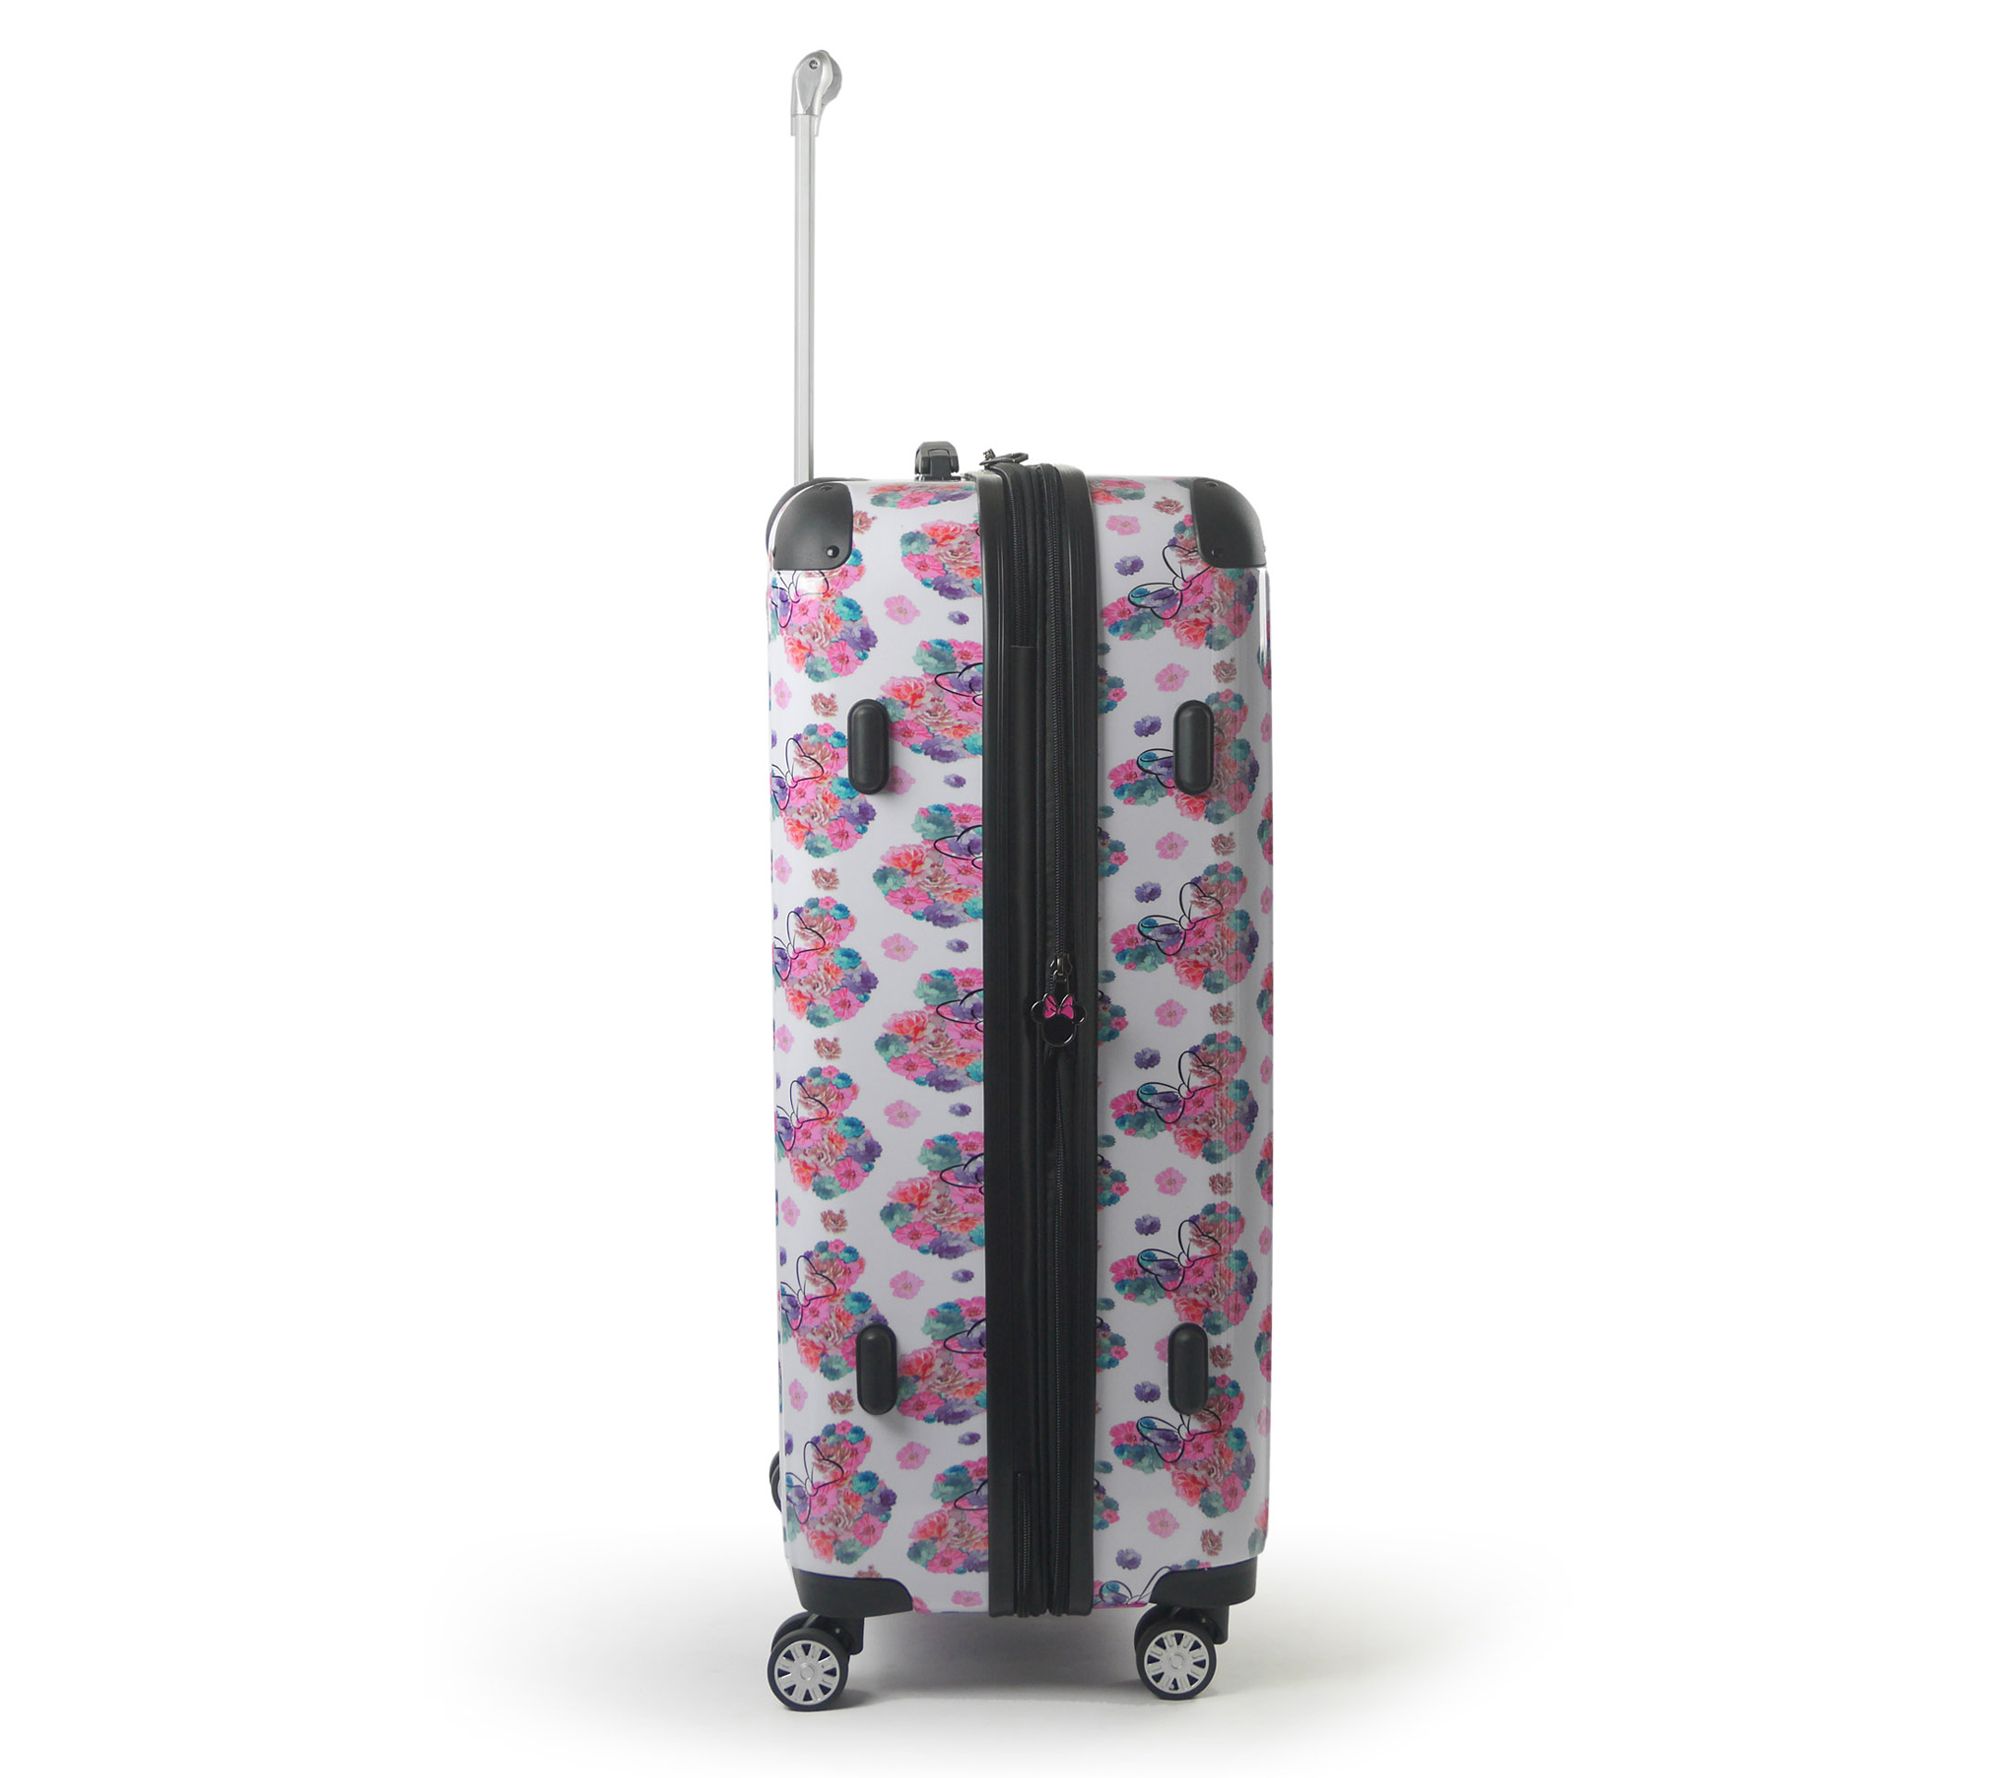 Ful Disney Minnie Mouse Floral 29 Hard Side Luggage